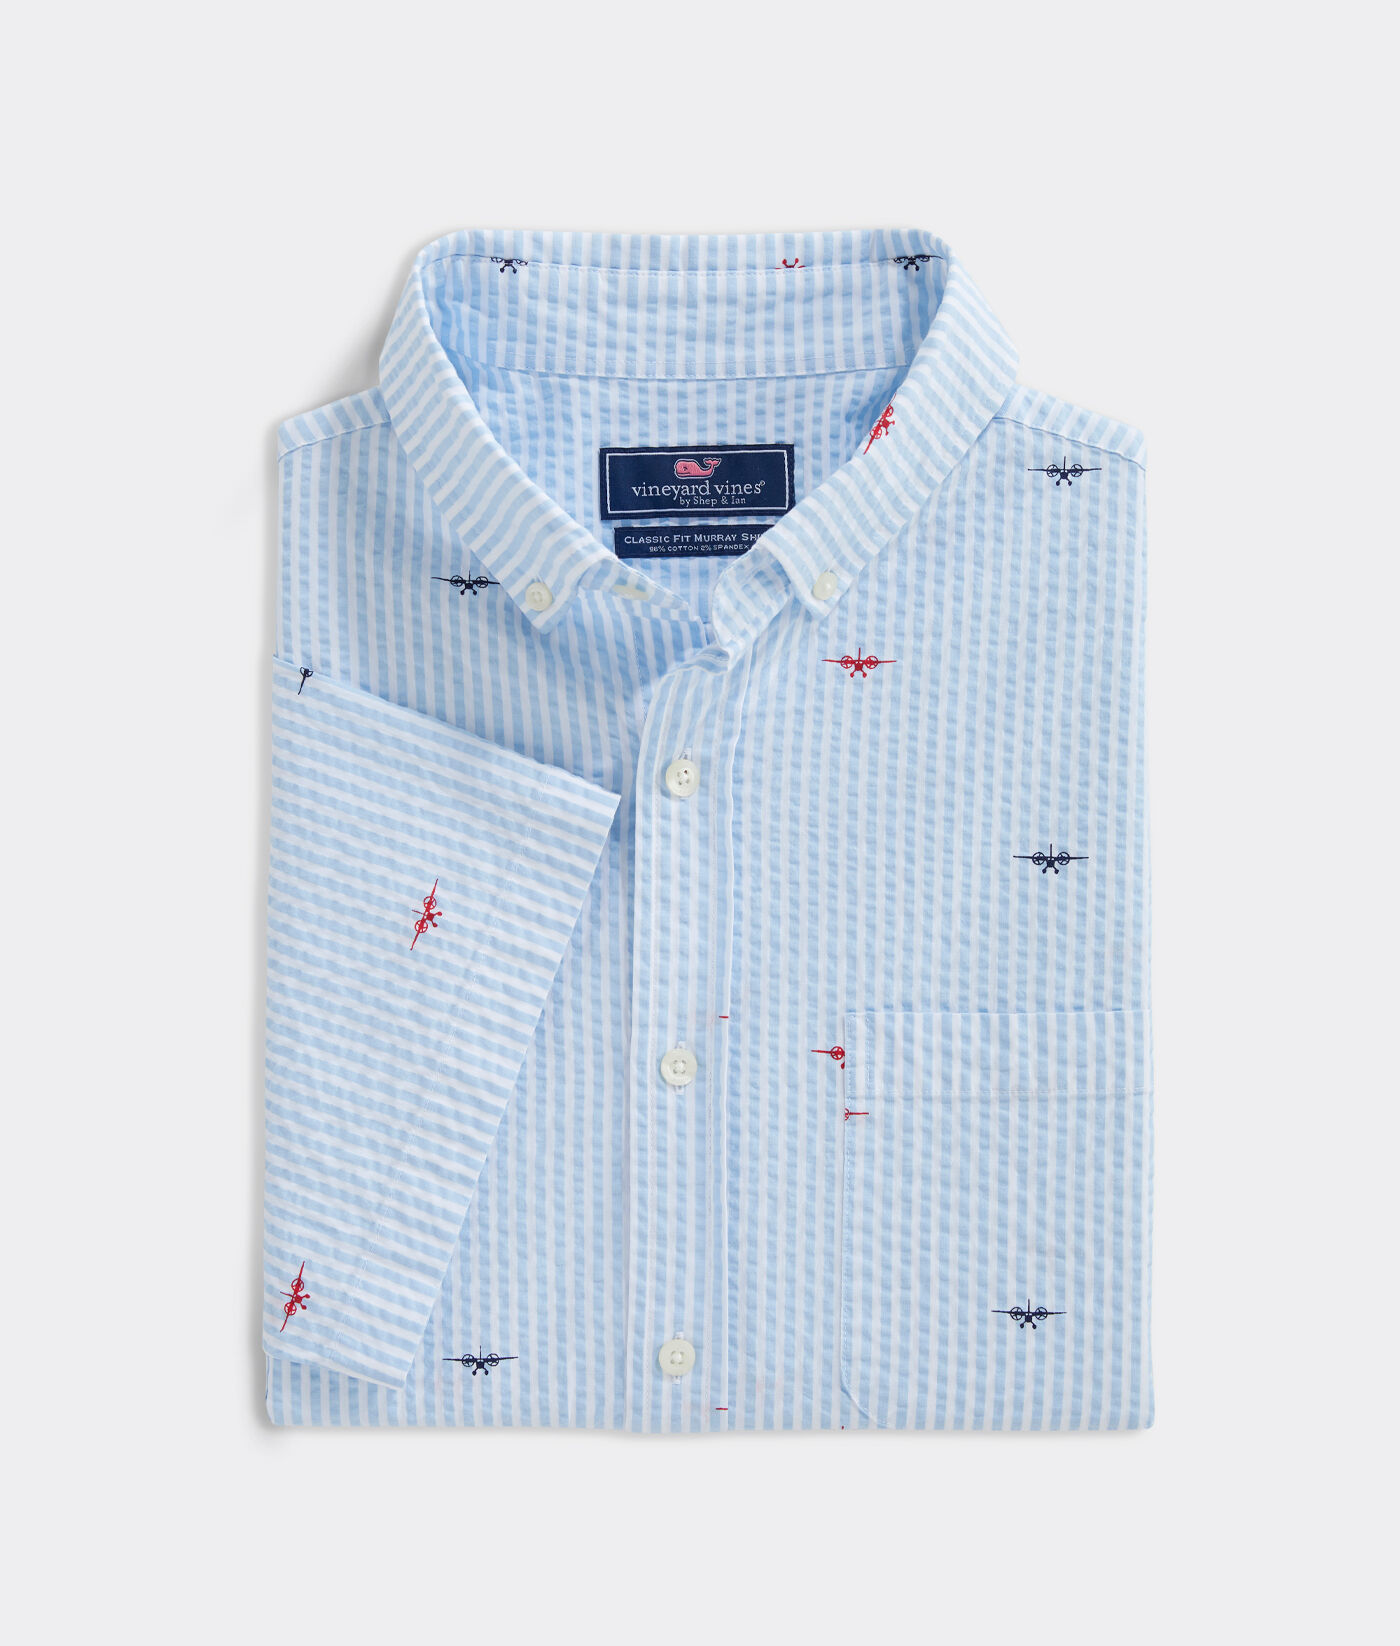 big and tall short sleeve button down shirts